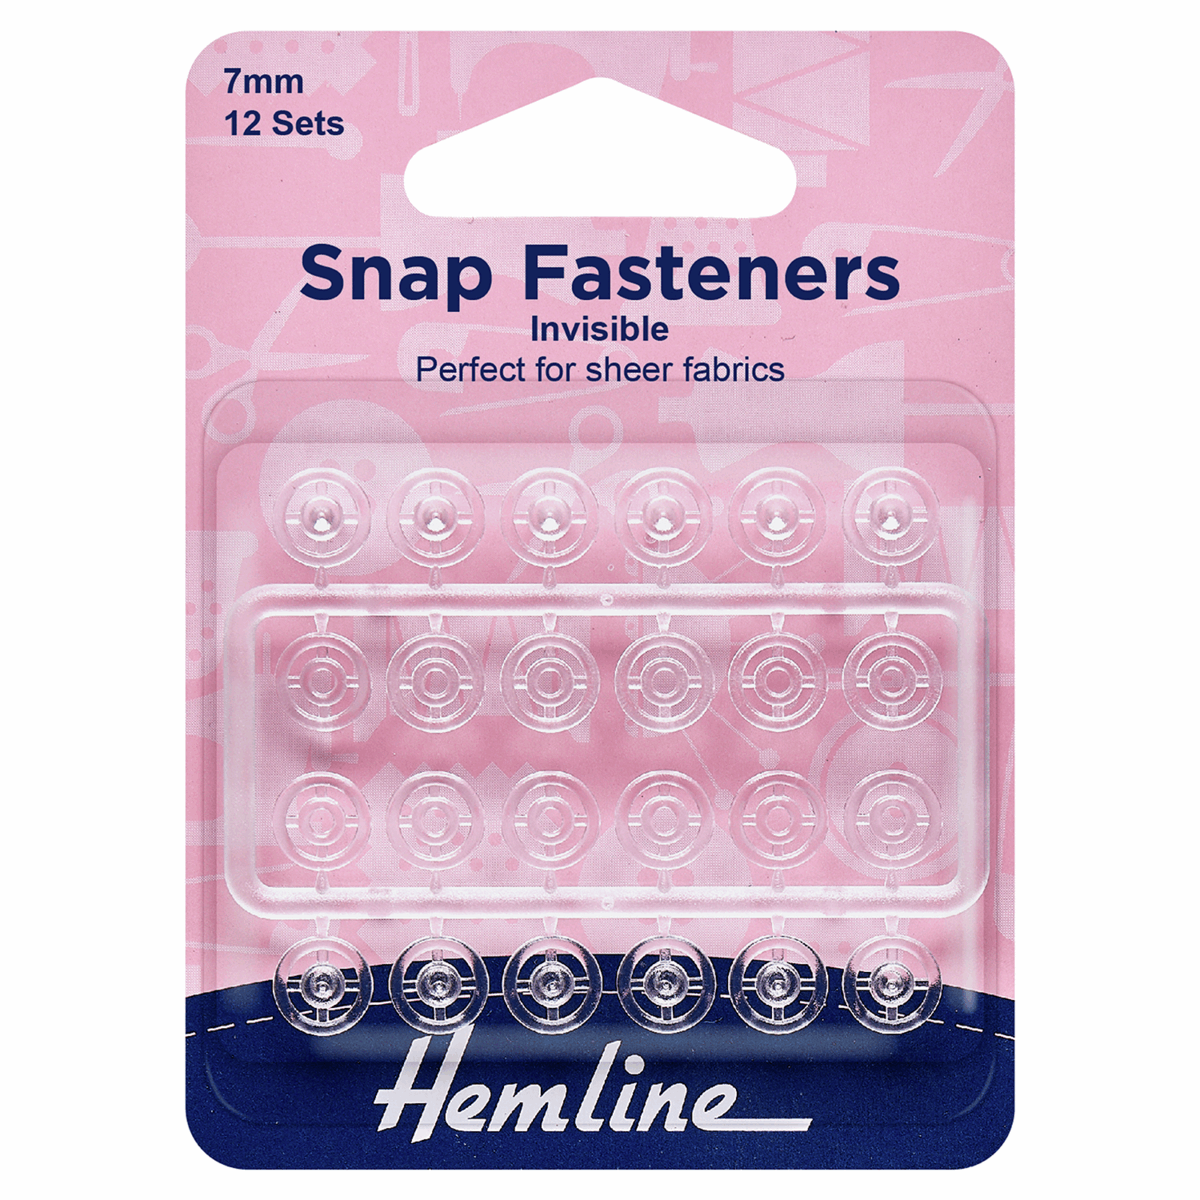 Hemline Sew On Snap Fasteners: Clear (Invisible) - 7mm